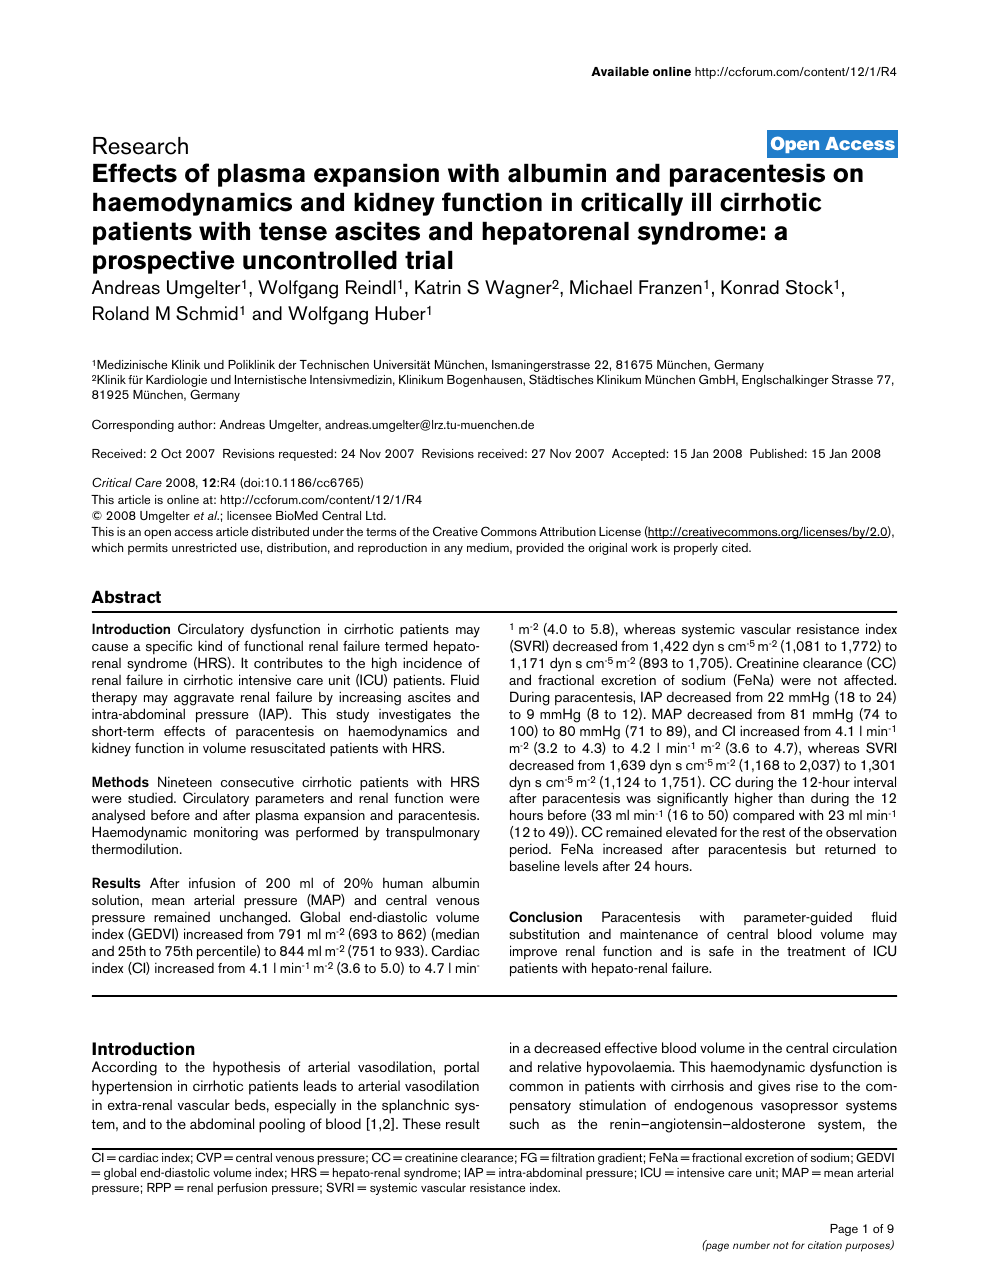 Effects Of Plasma Expansion With Albumin And Paracentesis On - 